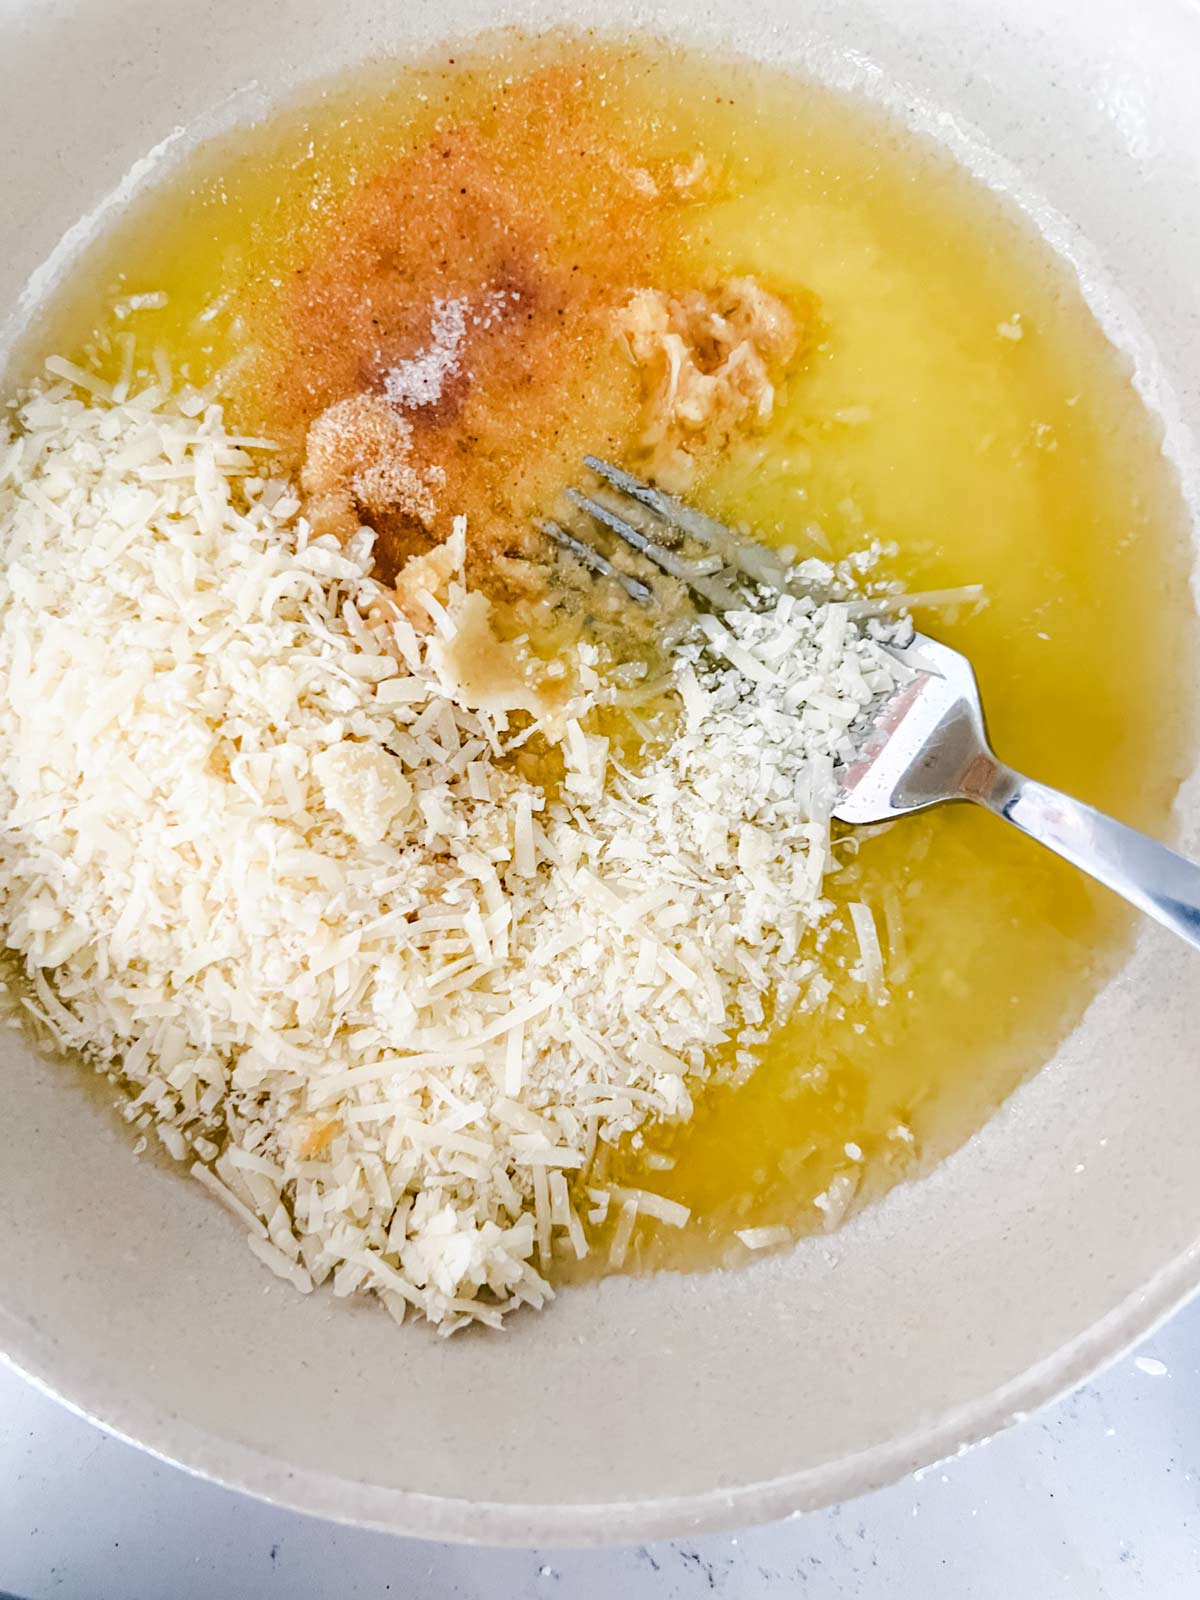 Oil, seasonings, and parmesan in a small bowl.